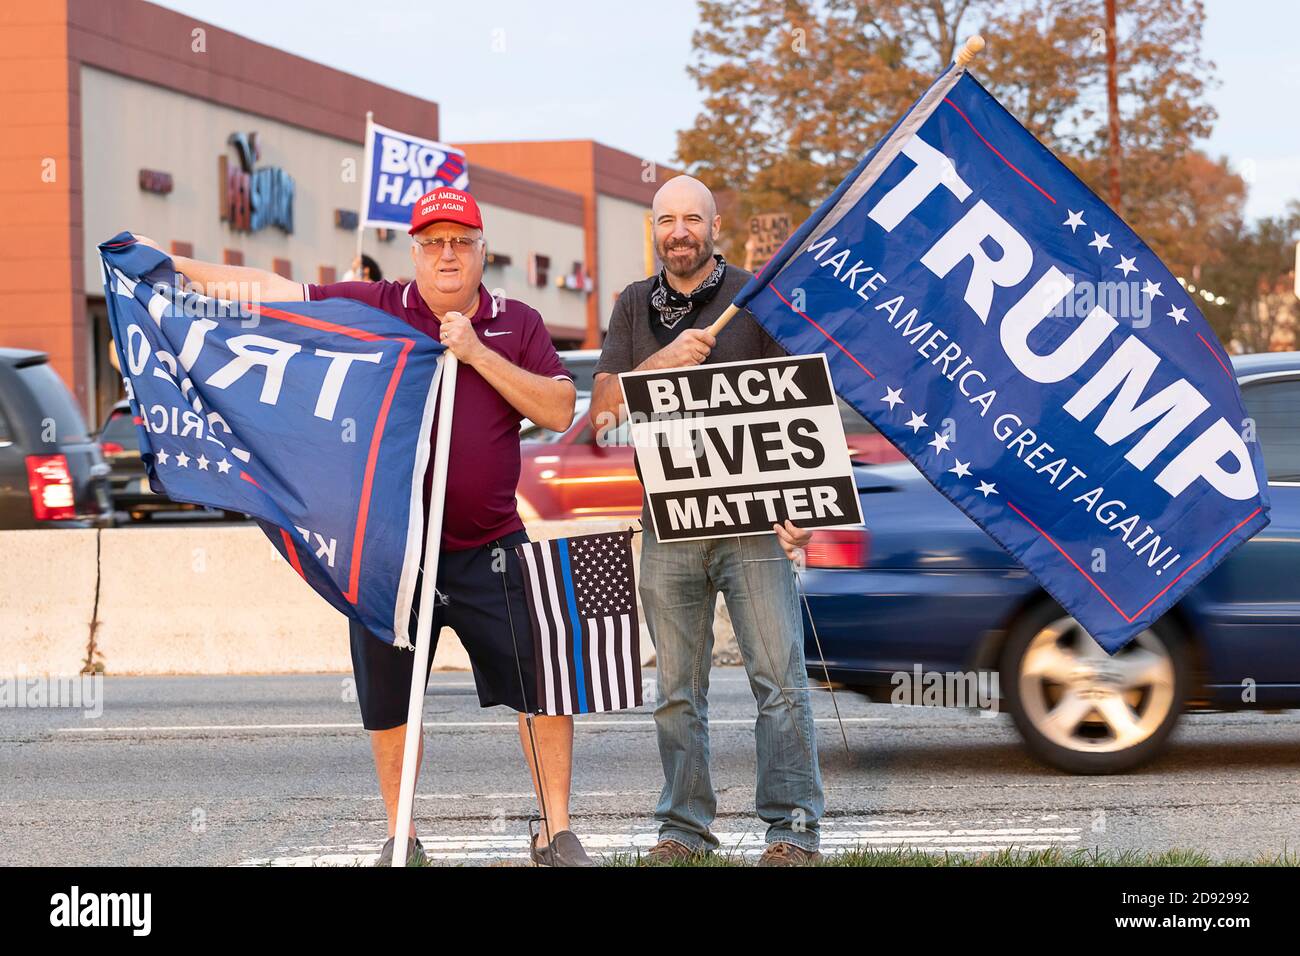 Donald Trump supporters holding signs and flags at local sidewalk rally, including 'Black Lives Matter' sign. Stock Photo